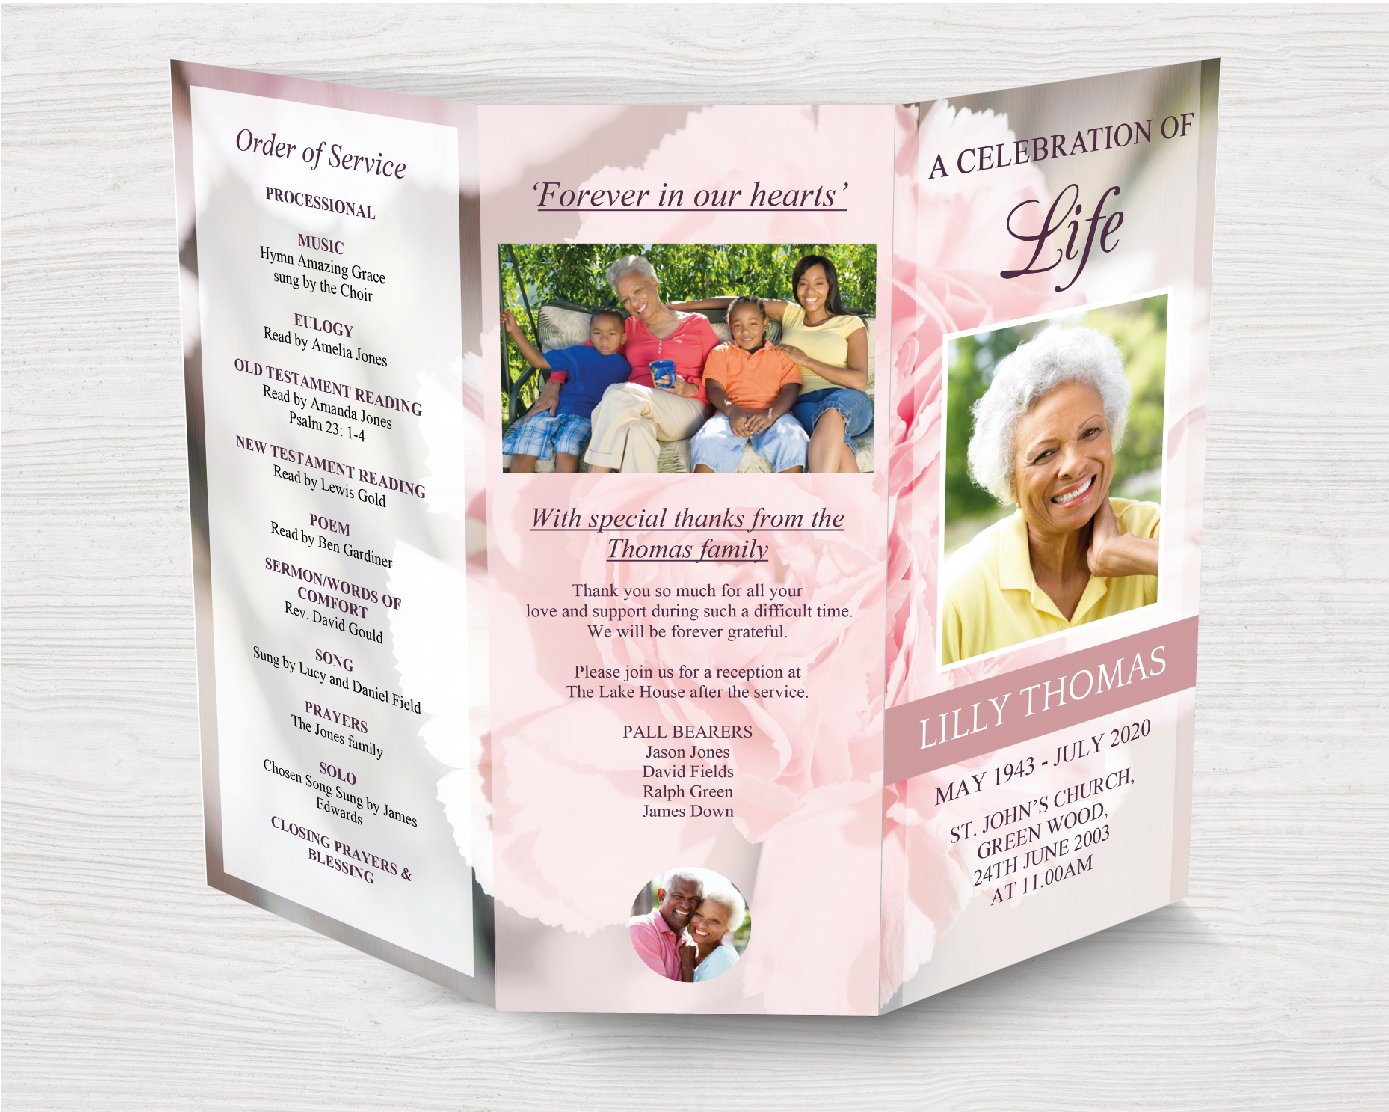 Trifold Pink Carnations Funeral Program Template